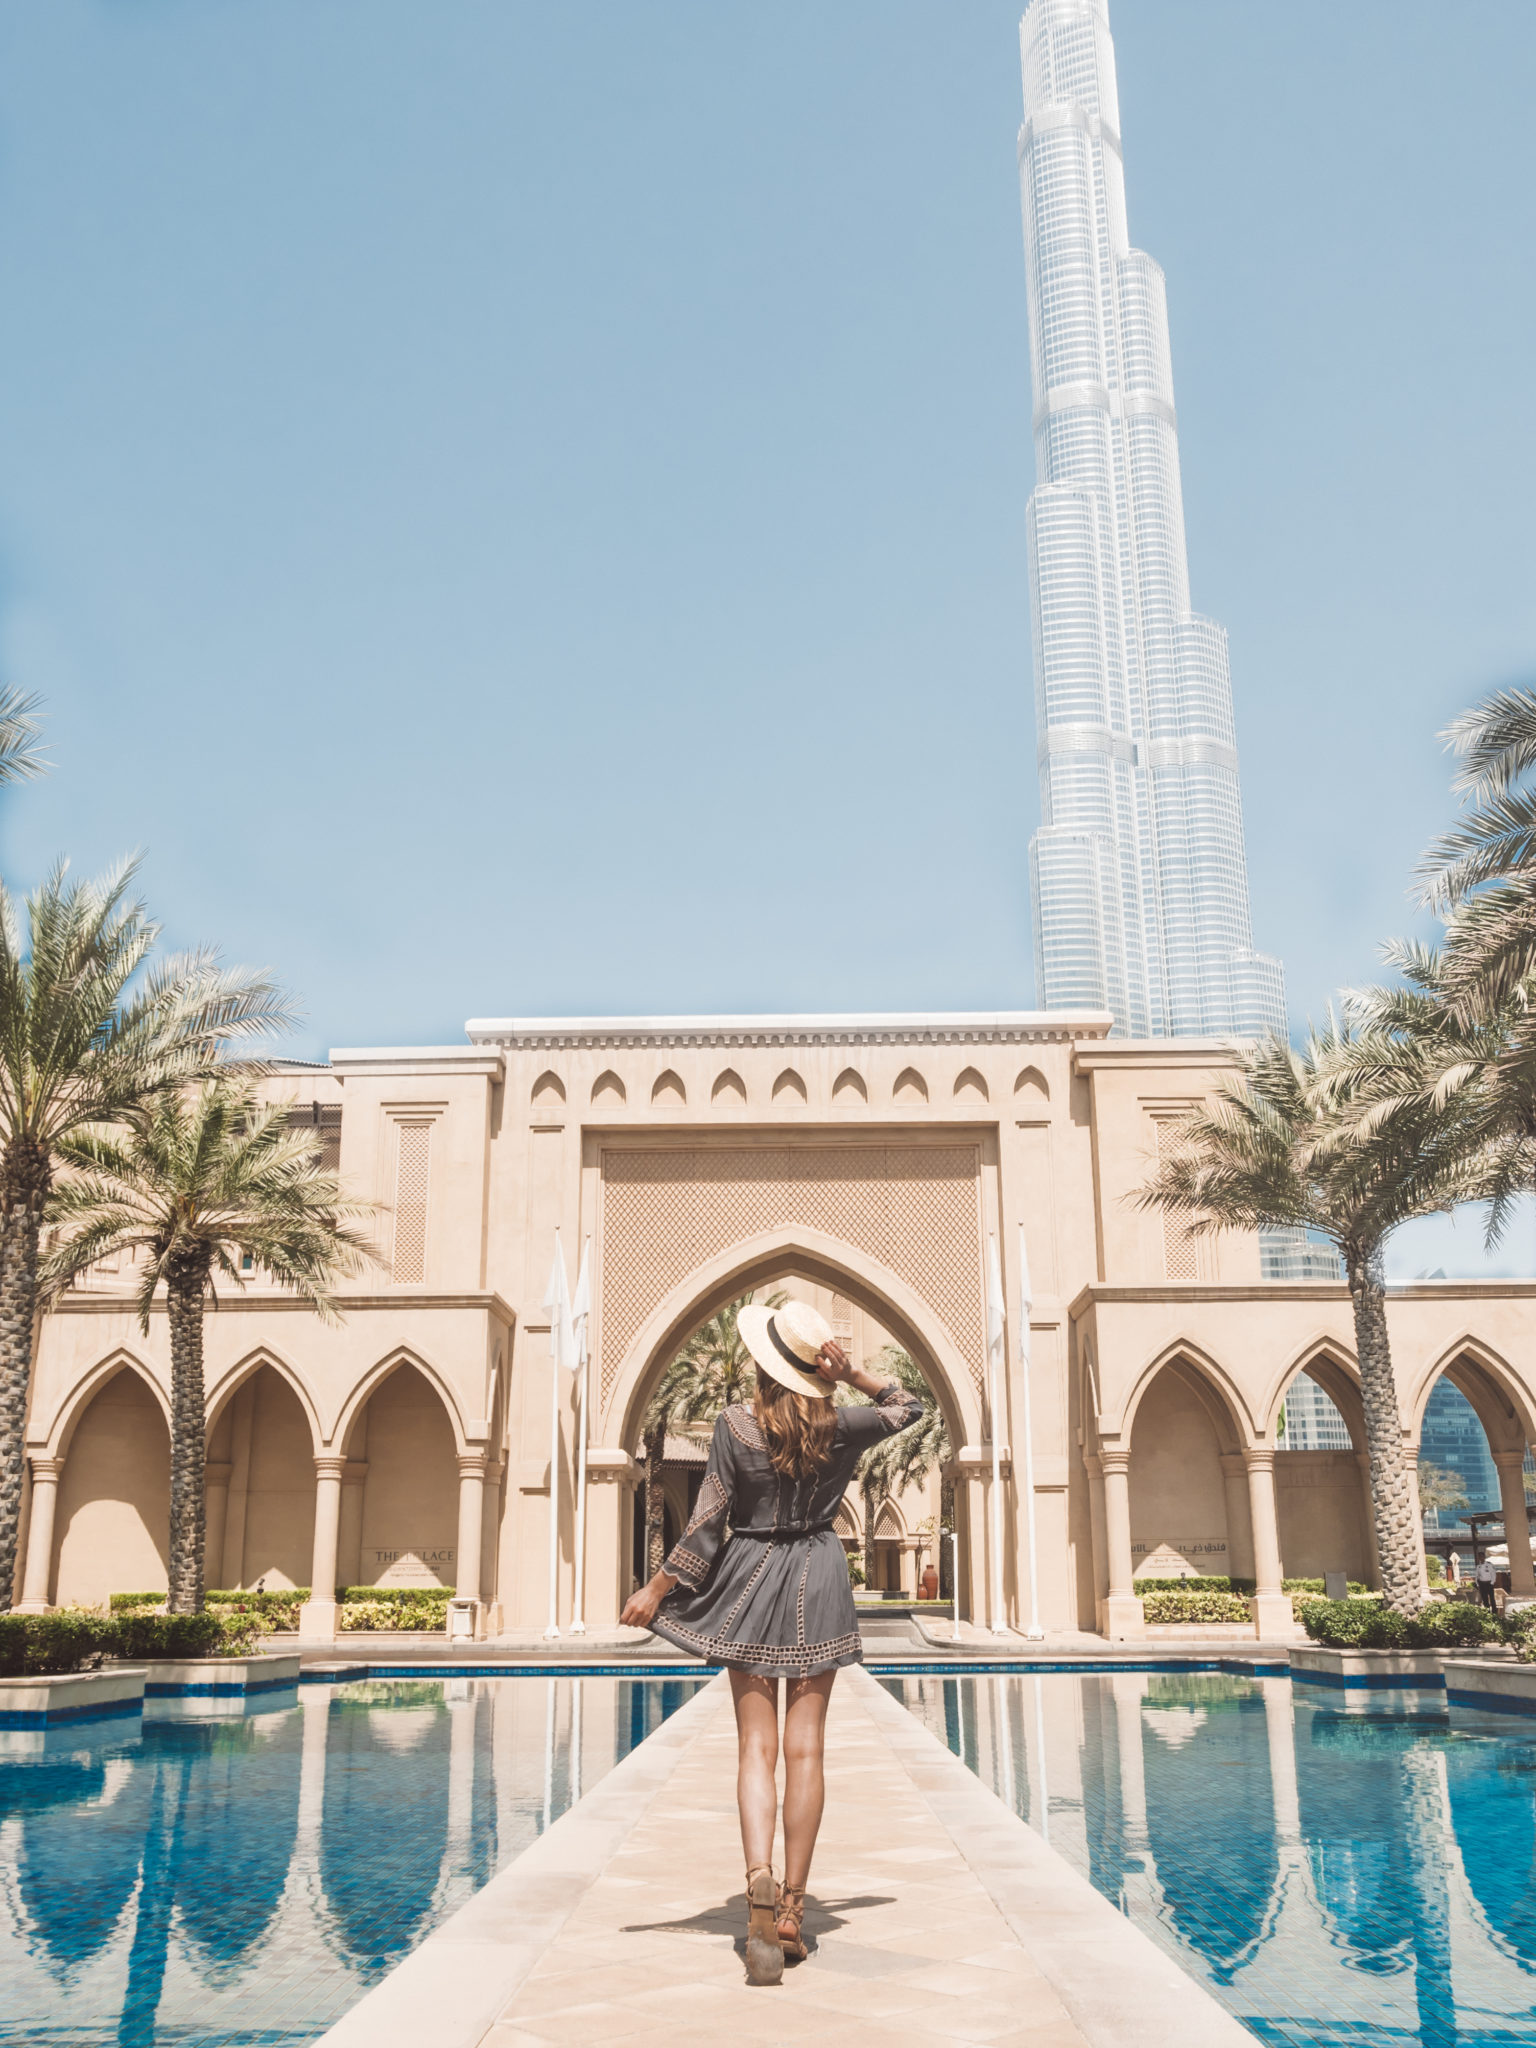 10 of the Best Photo Locations in Dubai